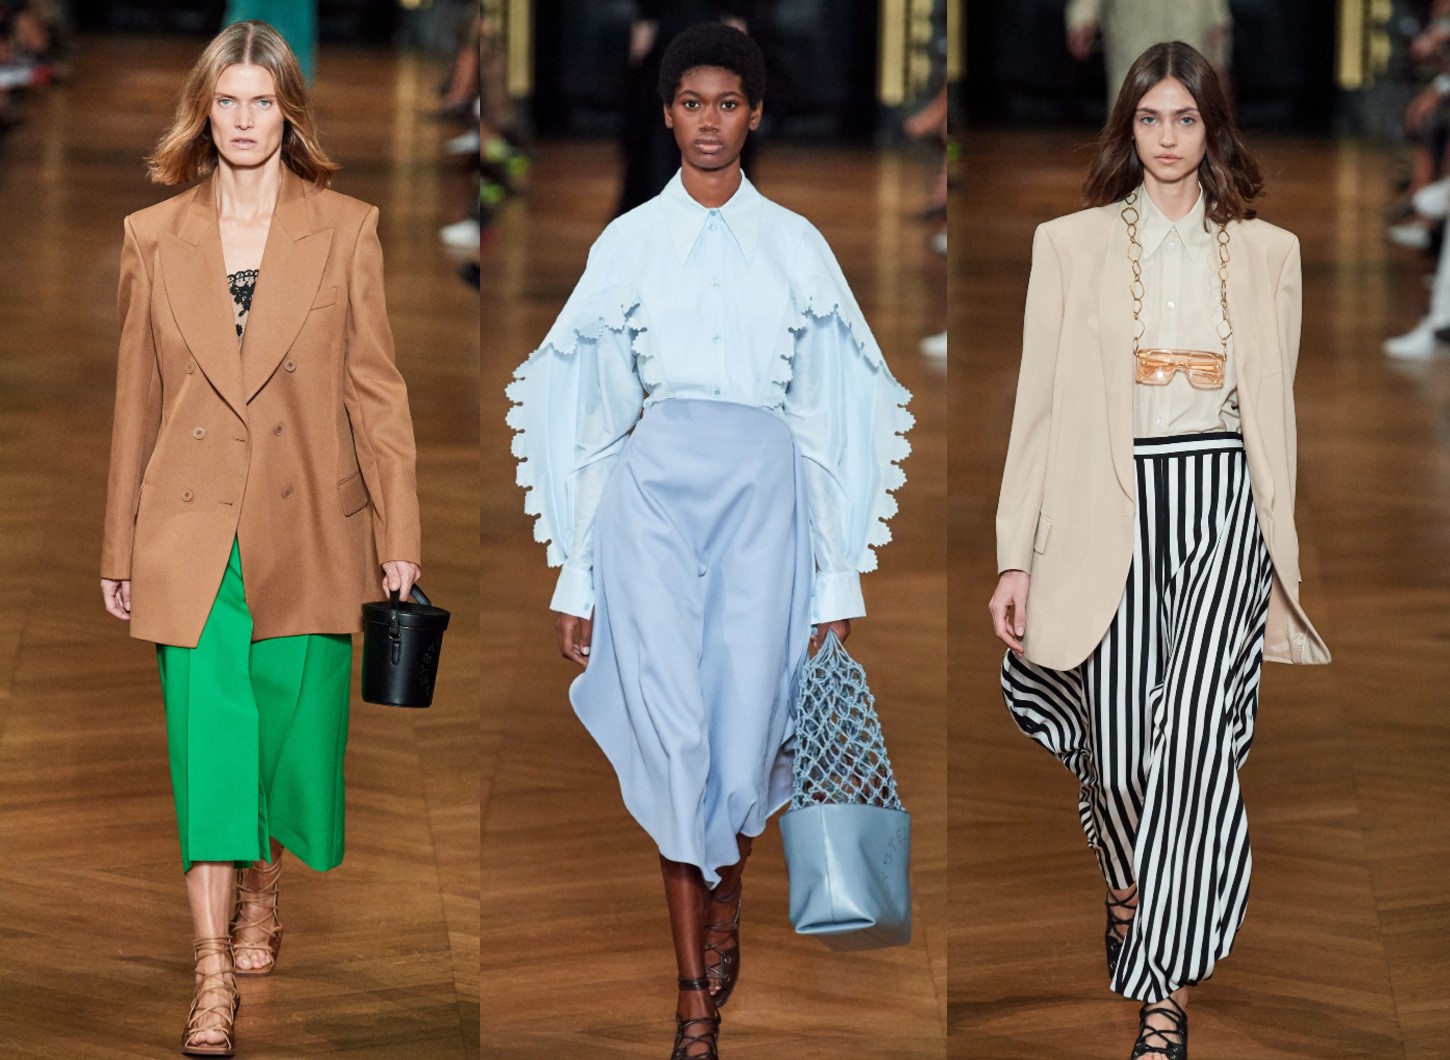 Paris Fashion Week Highlights for Spring 2020: From Louis Vuitton to ...